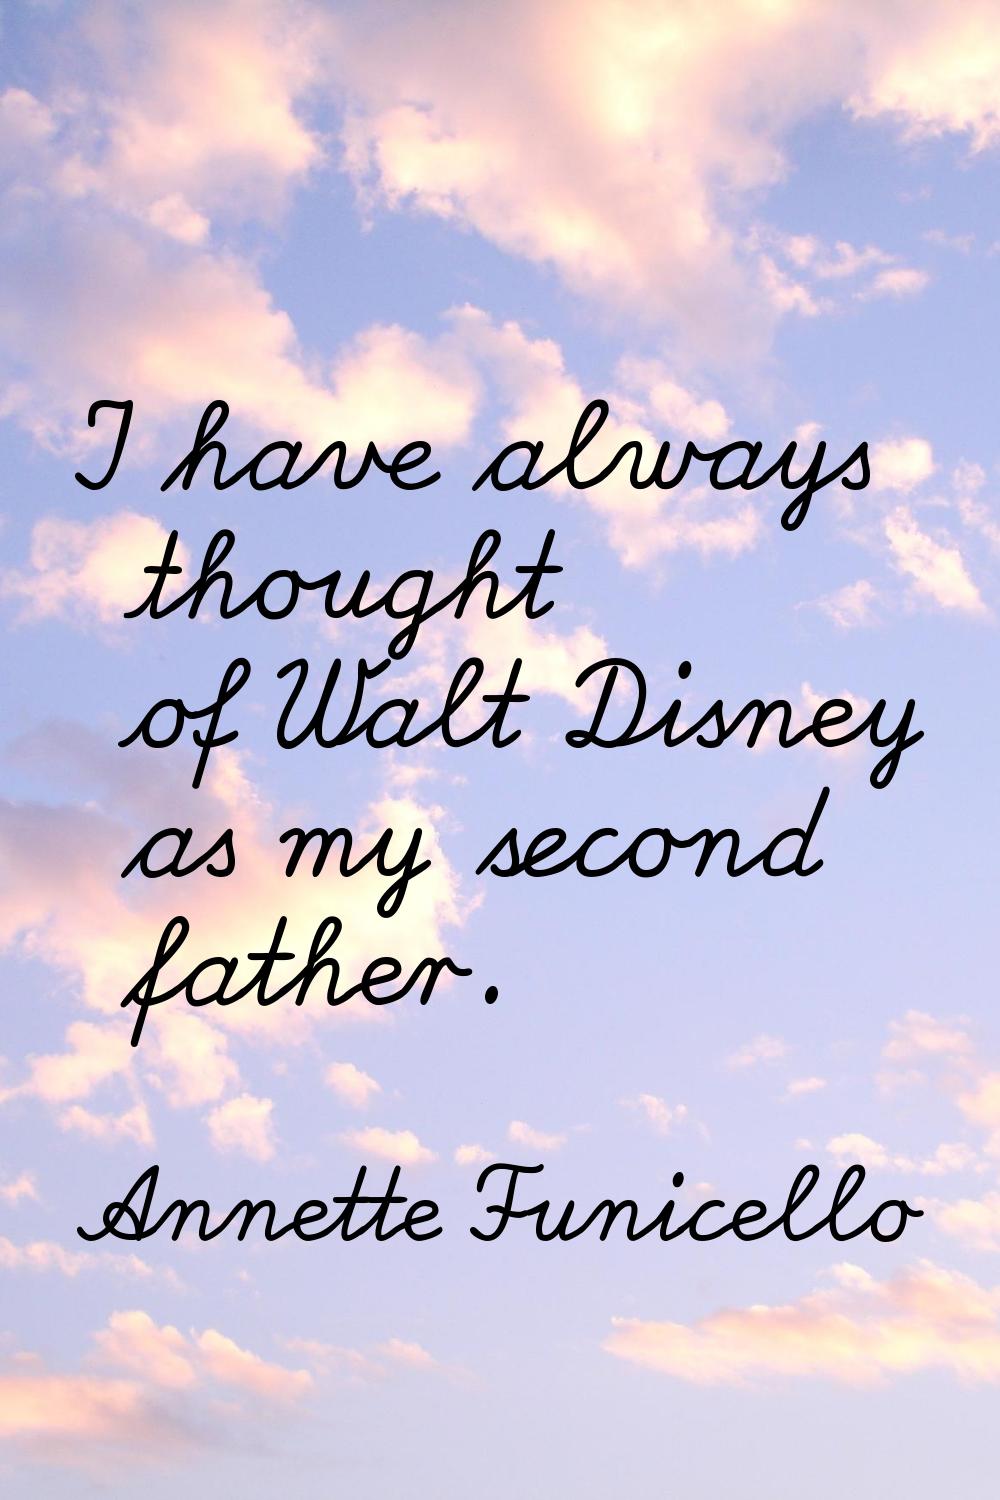 I have always thought of Walt Disney as my second father.